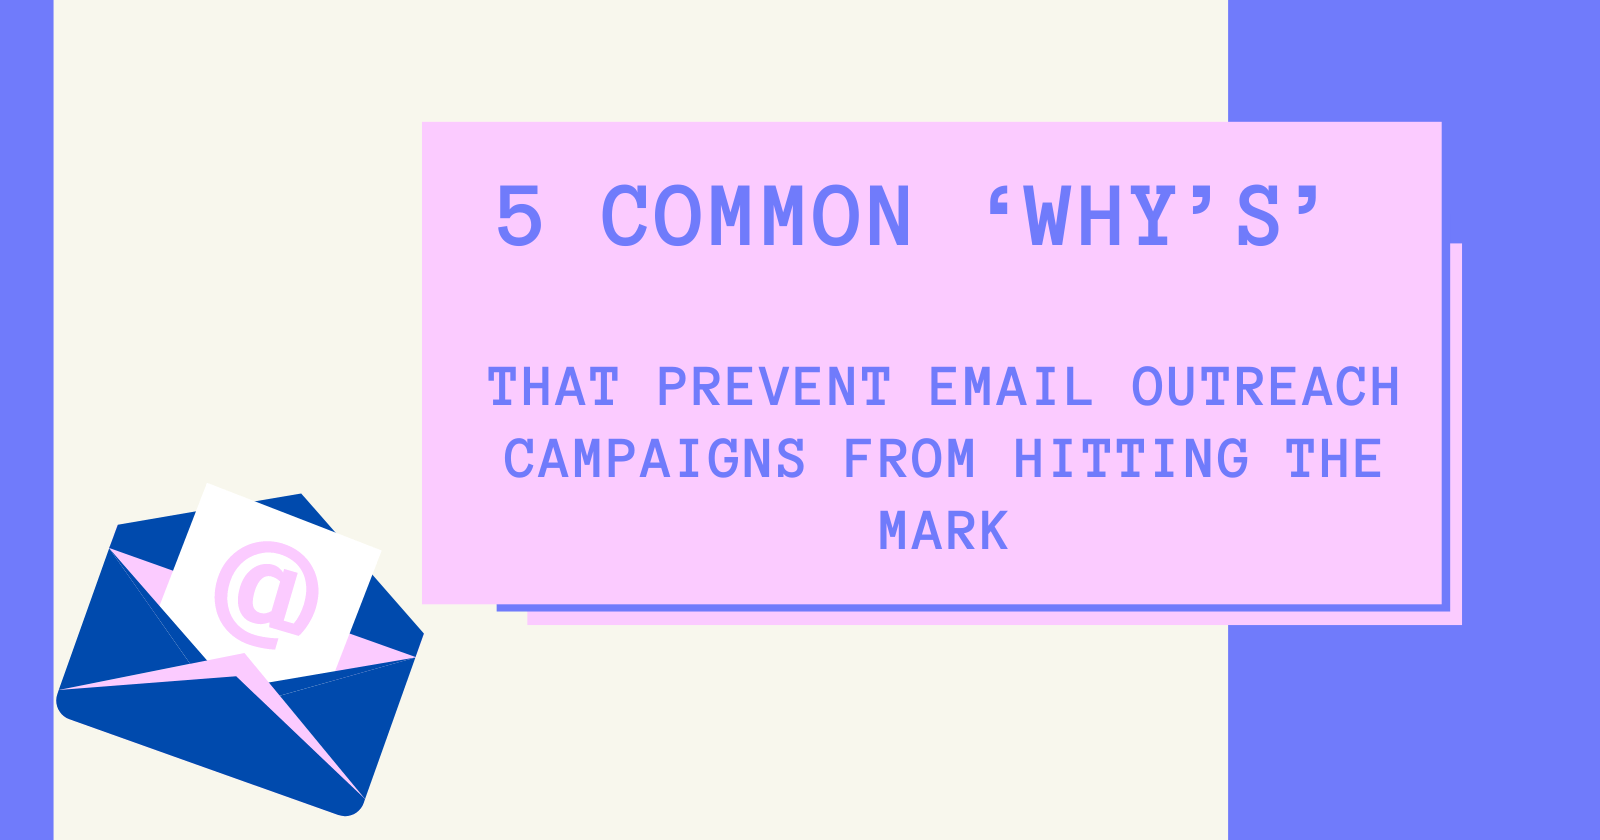 5 common whys that prevent email outreach campaigns from hitting the mark 60019dec7824a